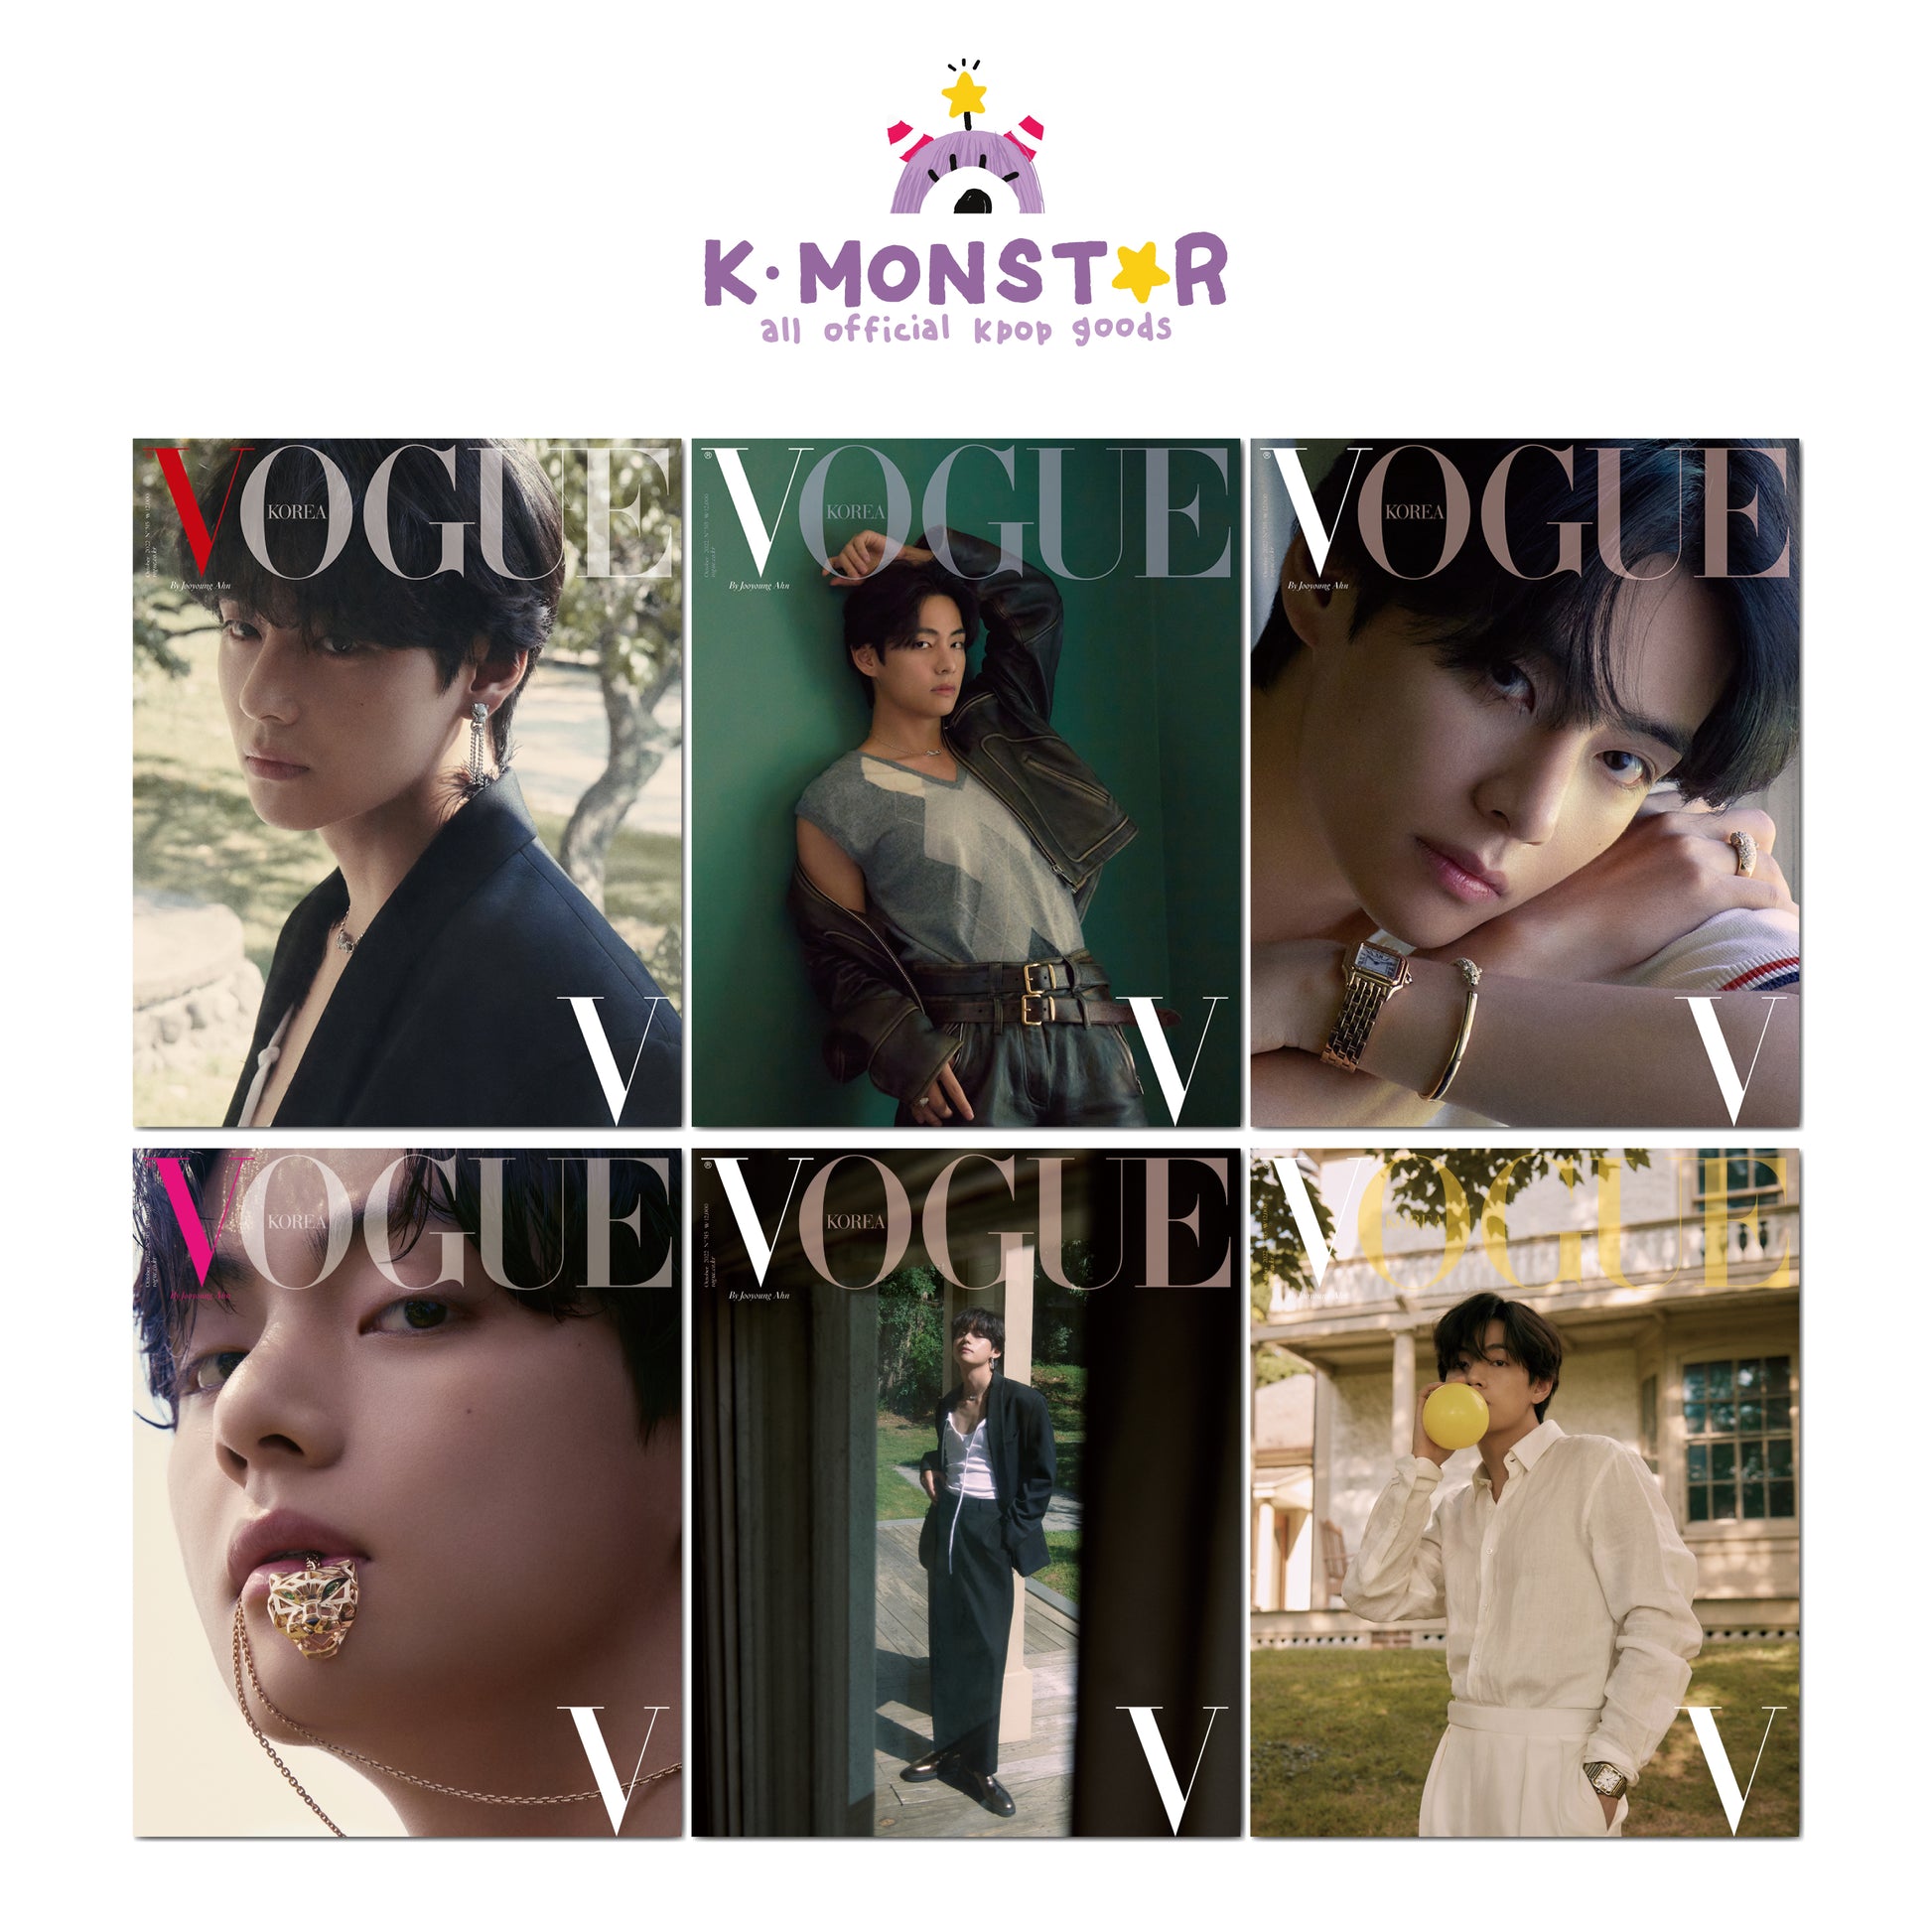 BTS Covers Vogue Singapore January February 2022 Issue